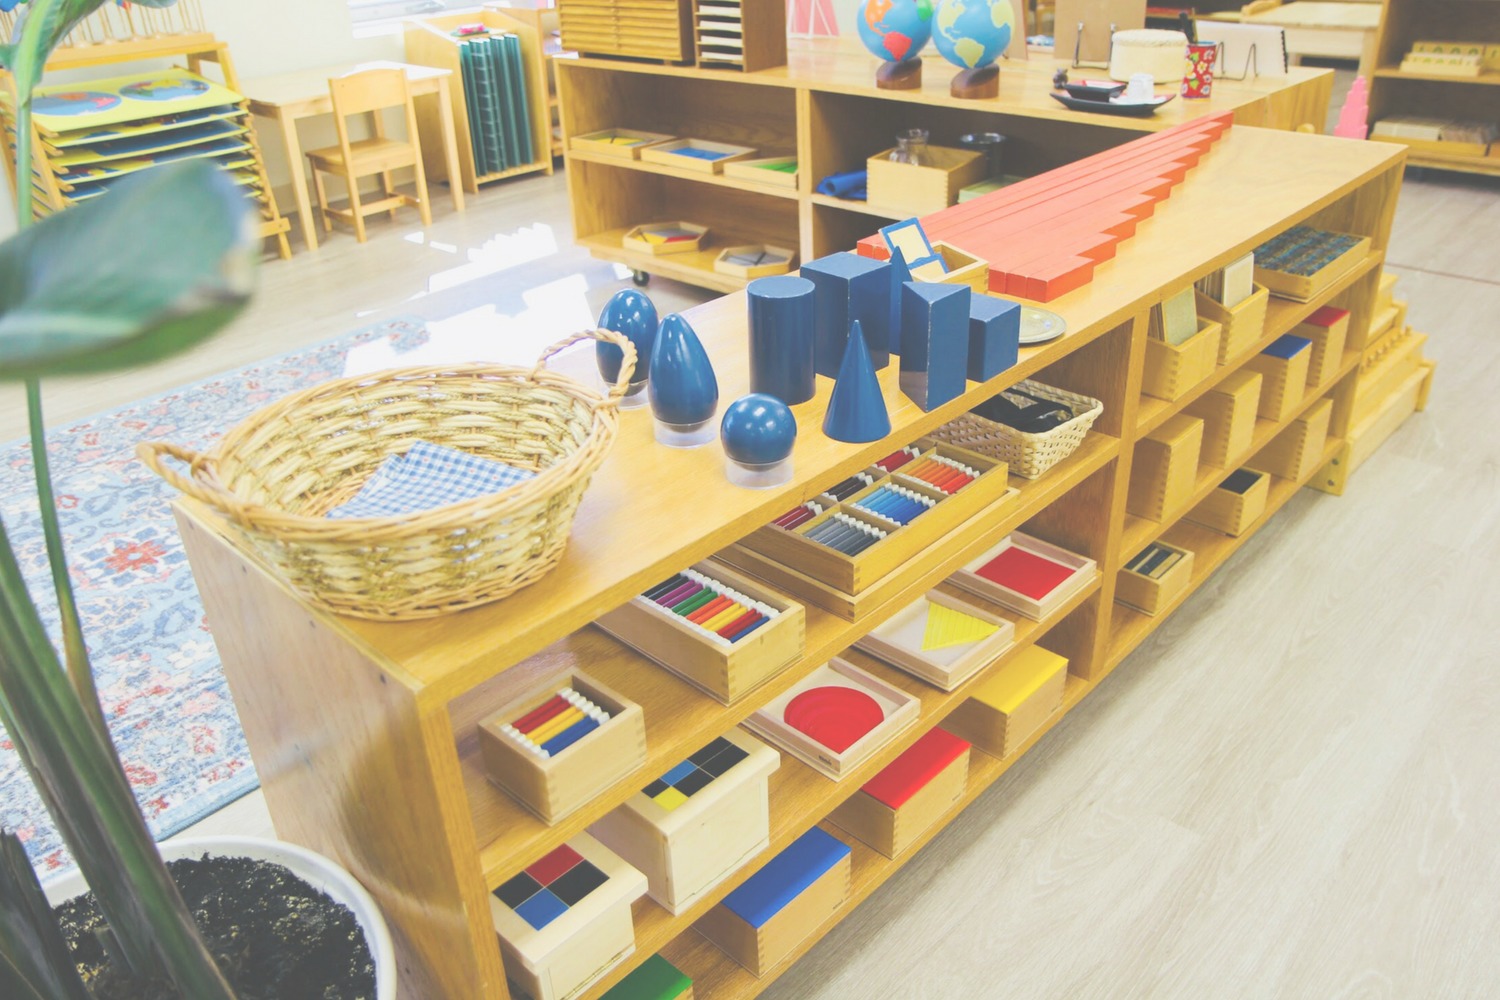 Picture Of The Children's House Environment